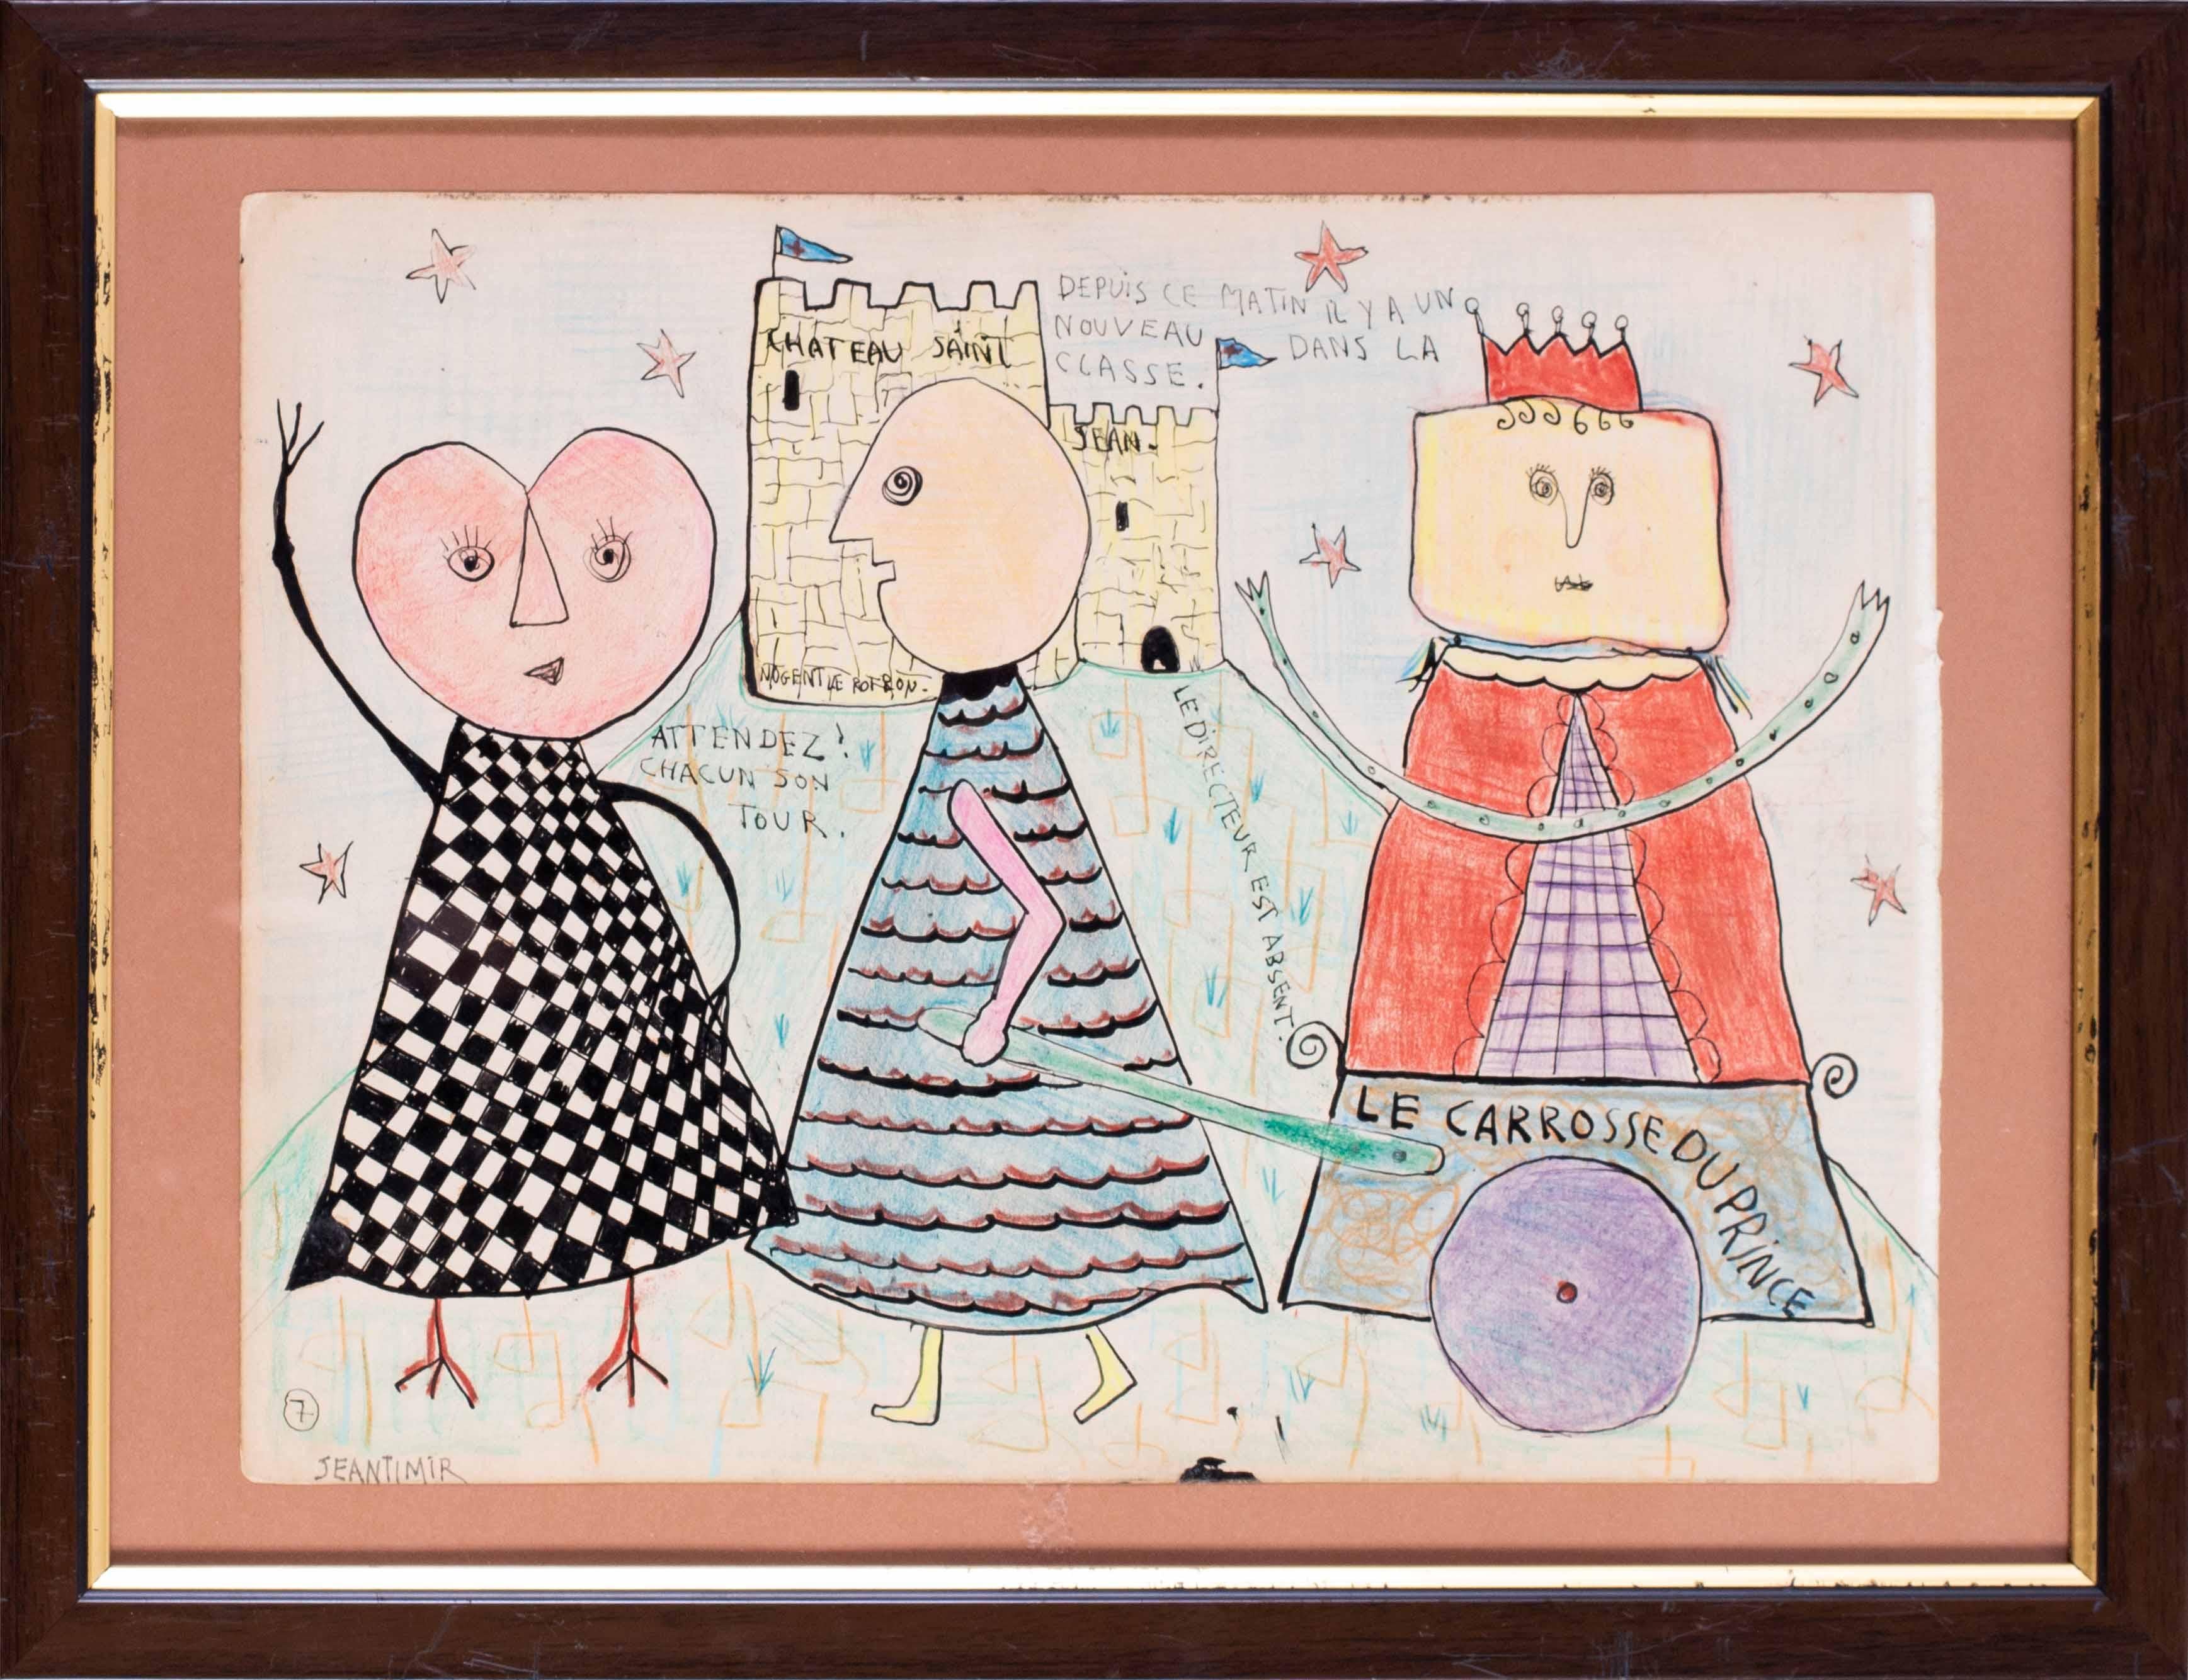 20th Century French Surrealist, avant-garde, naive drawing